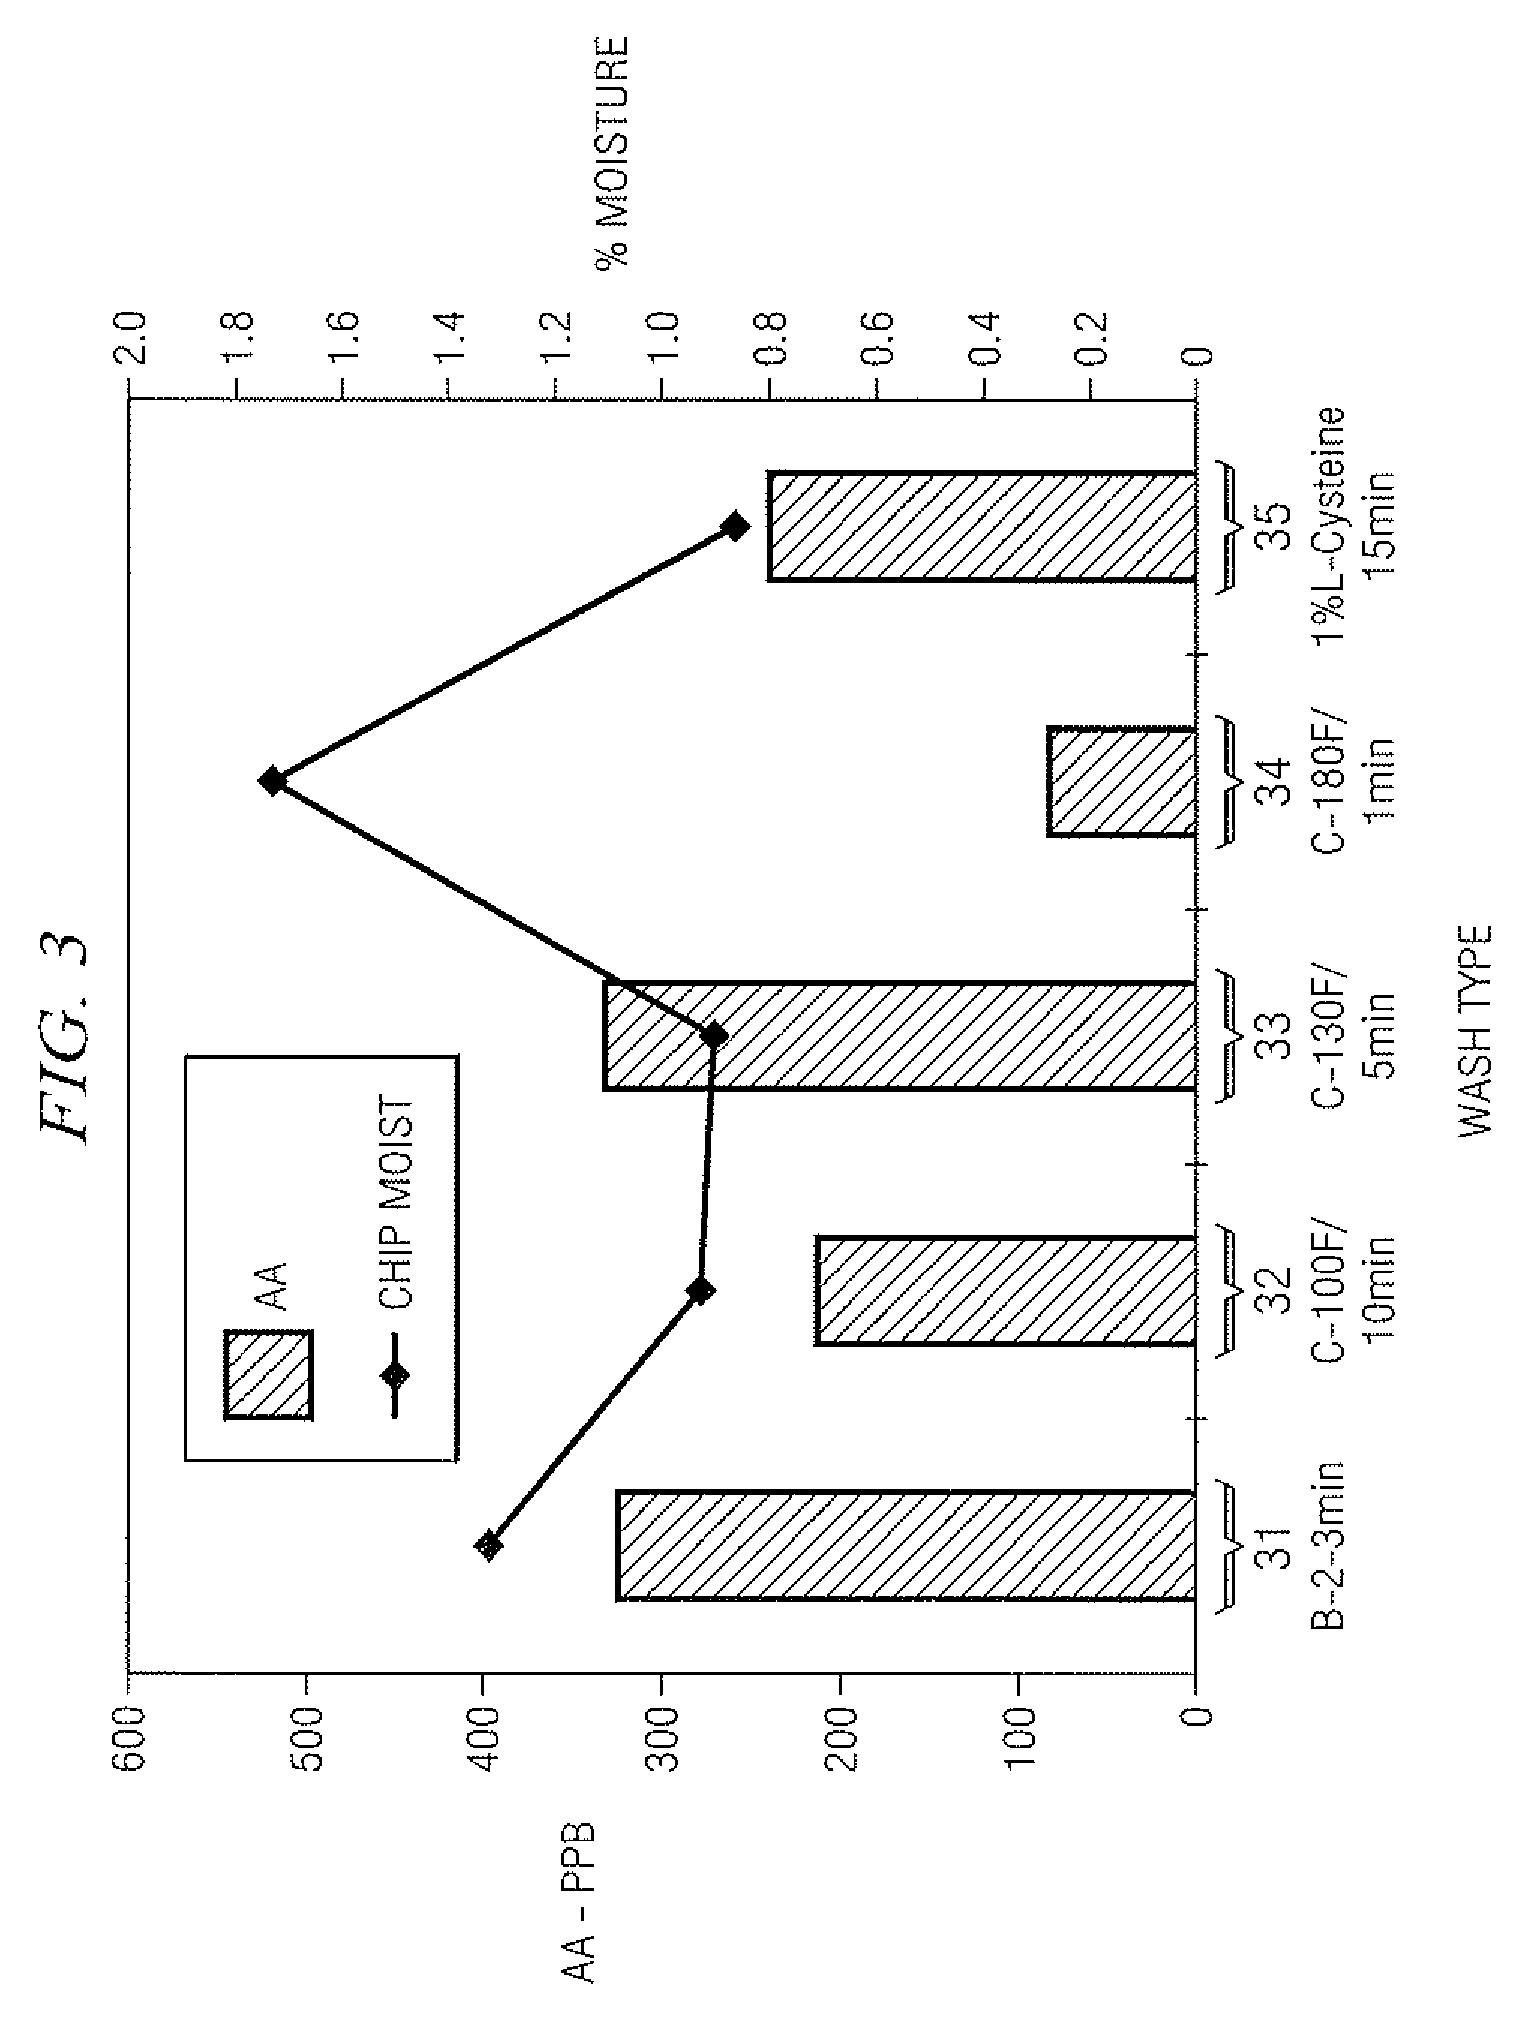 Method for Reducing Acrylamide Formation in Thermally Processed Foods